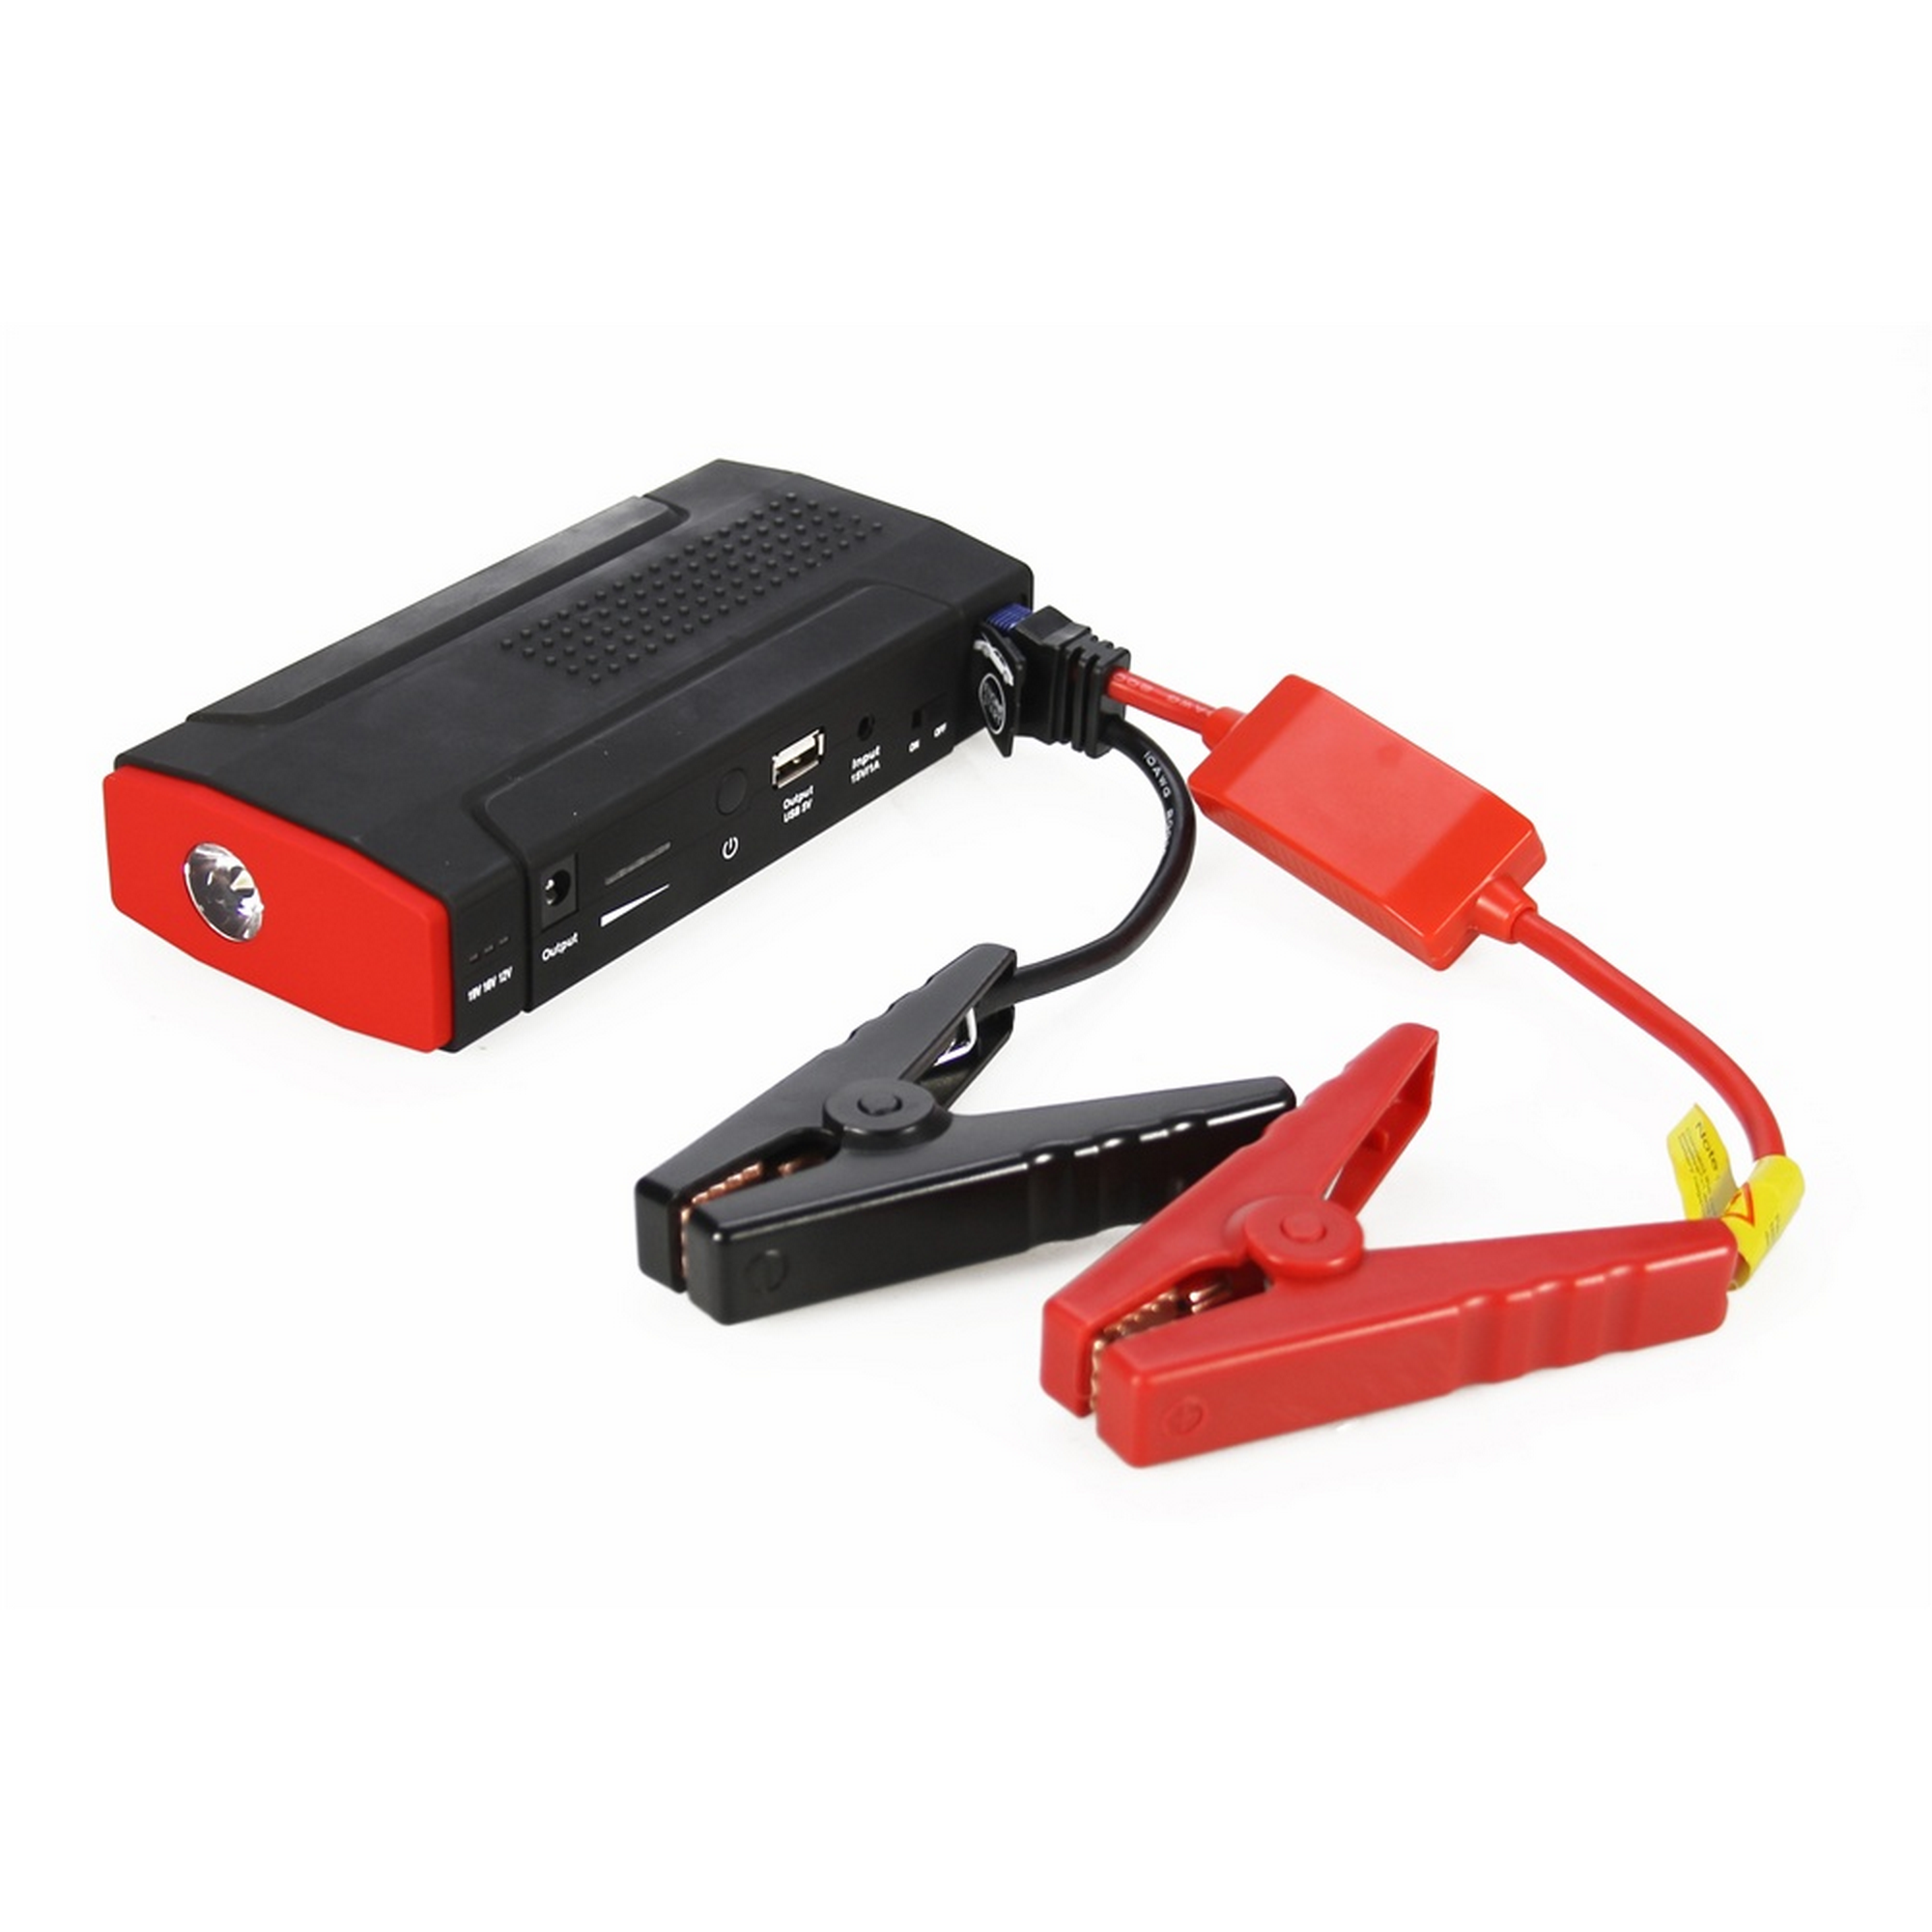 Jump Starter 13800 mAh + product picture